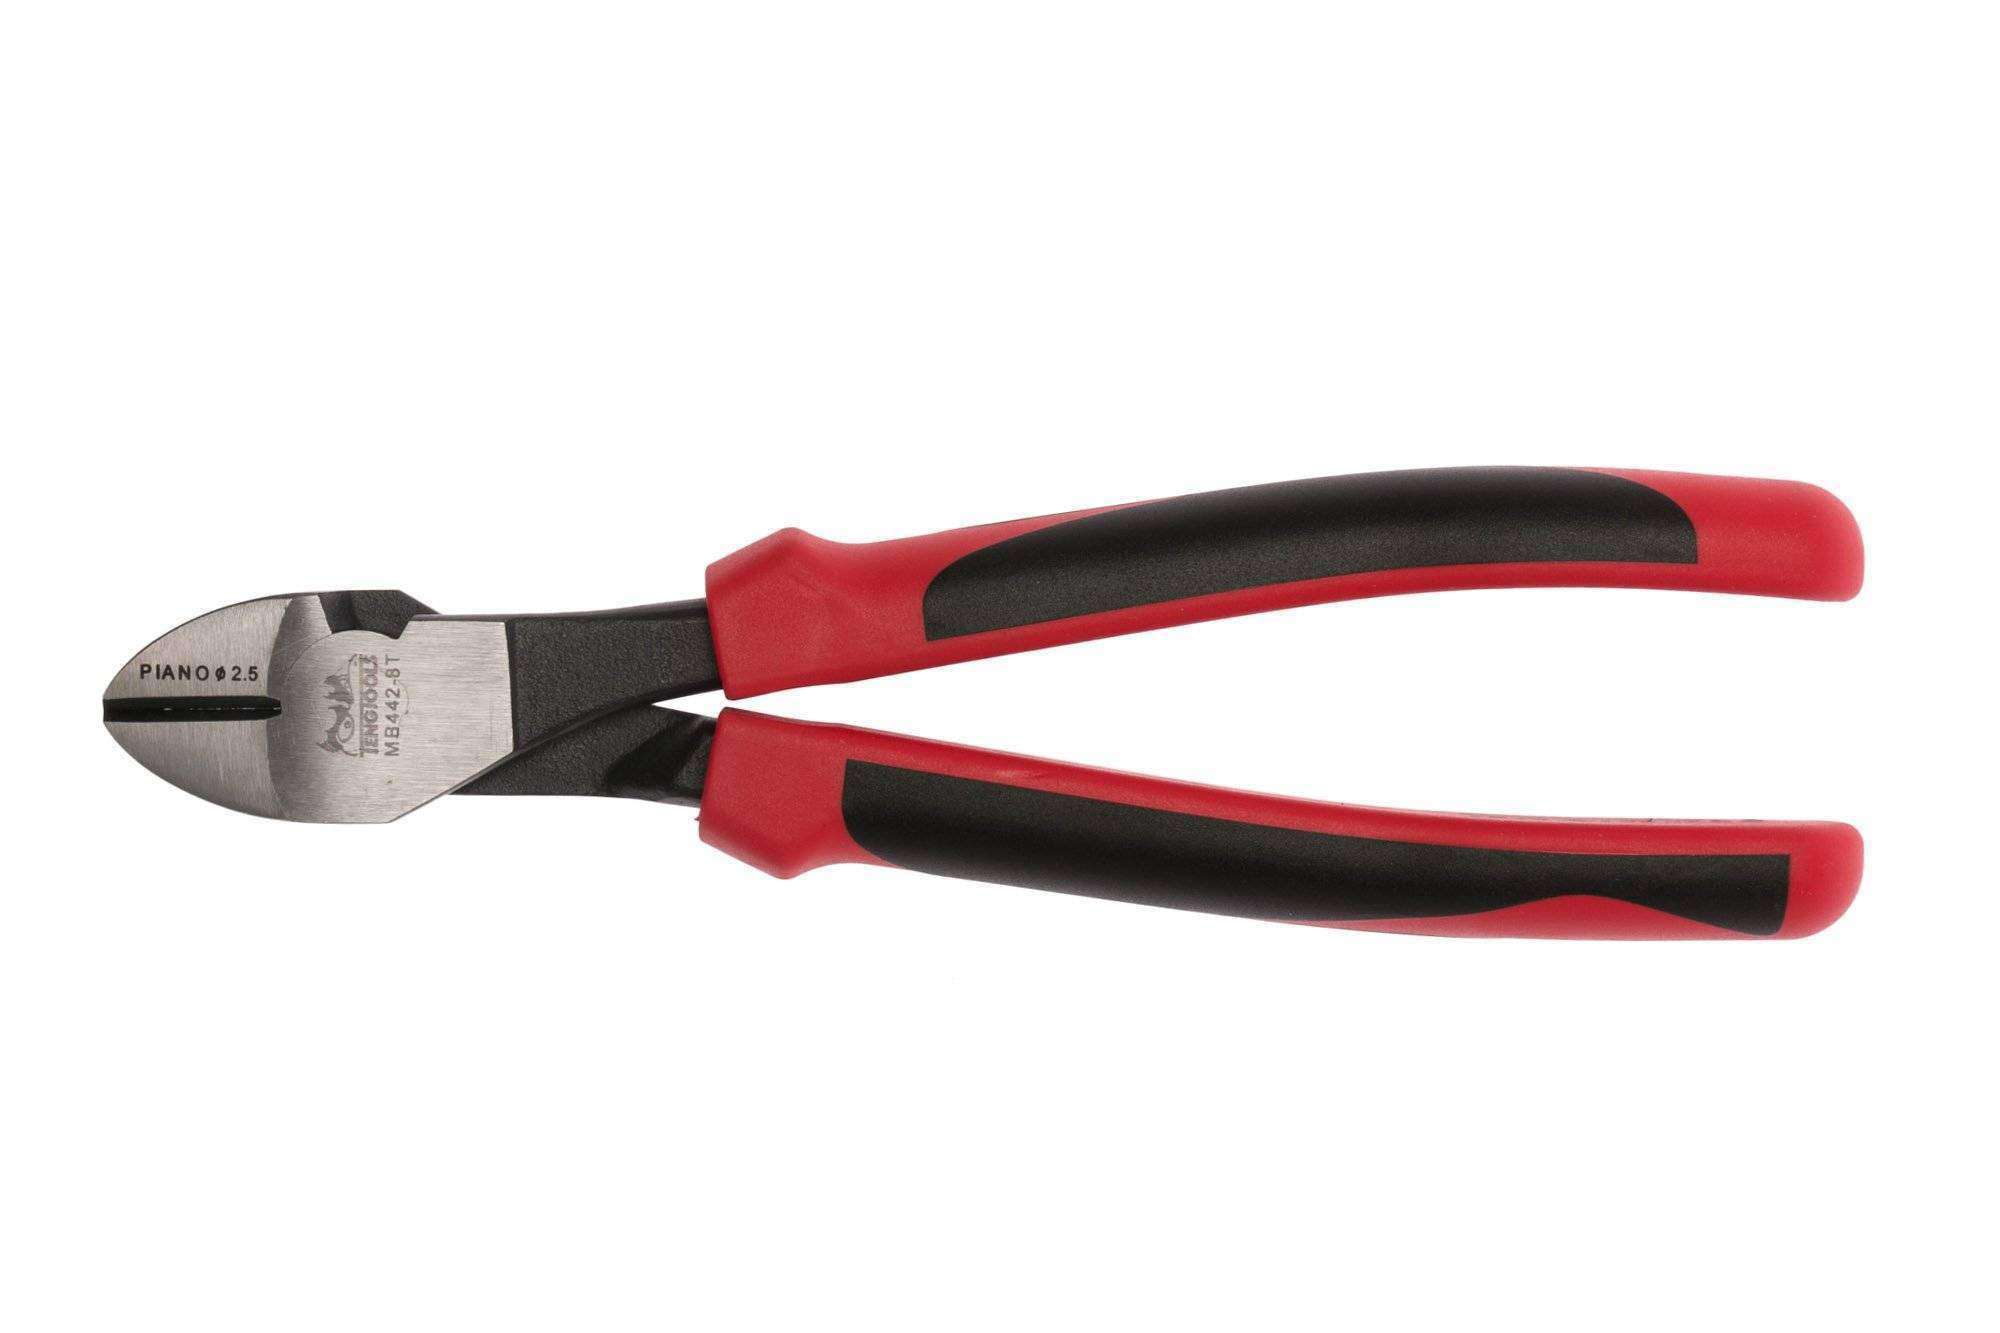 Teng Tools 8 Inch Heavy Duty Precision Side Cutting Pliers With TPR Grip Handles - MB442-8T